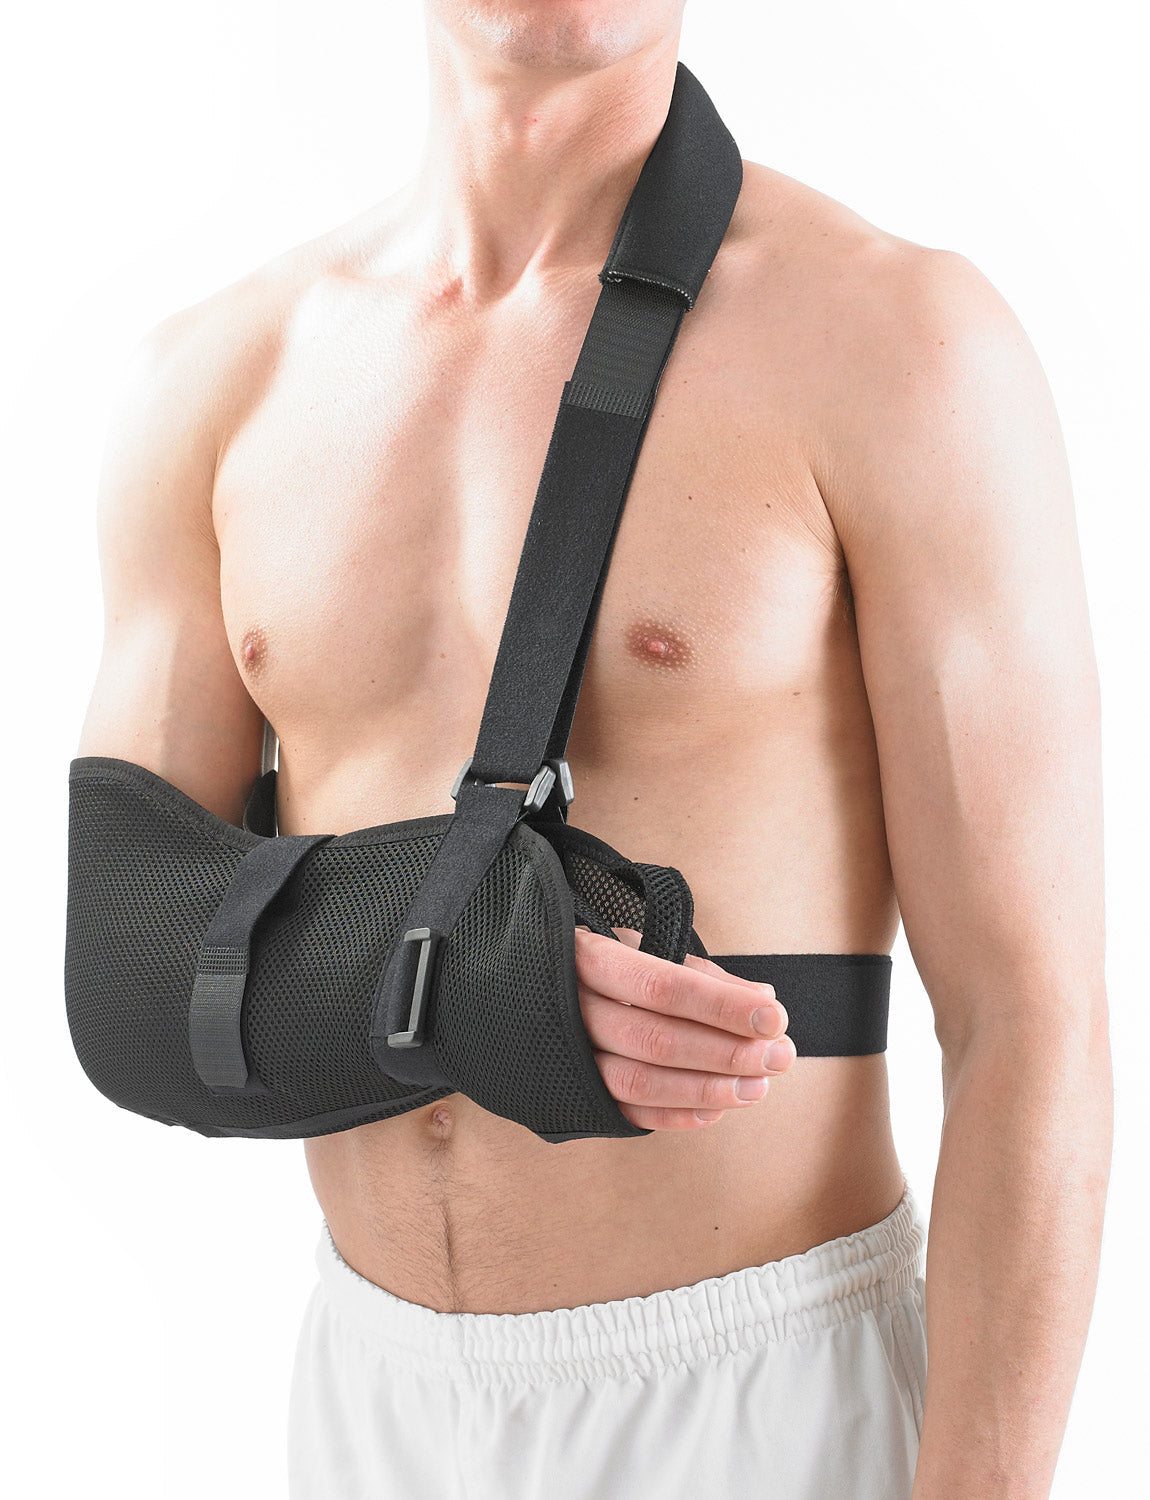 Airflow Breathable Arm Sling